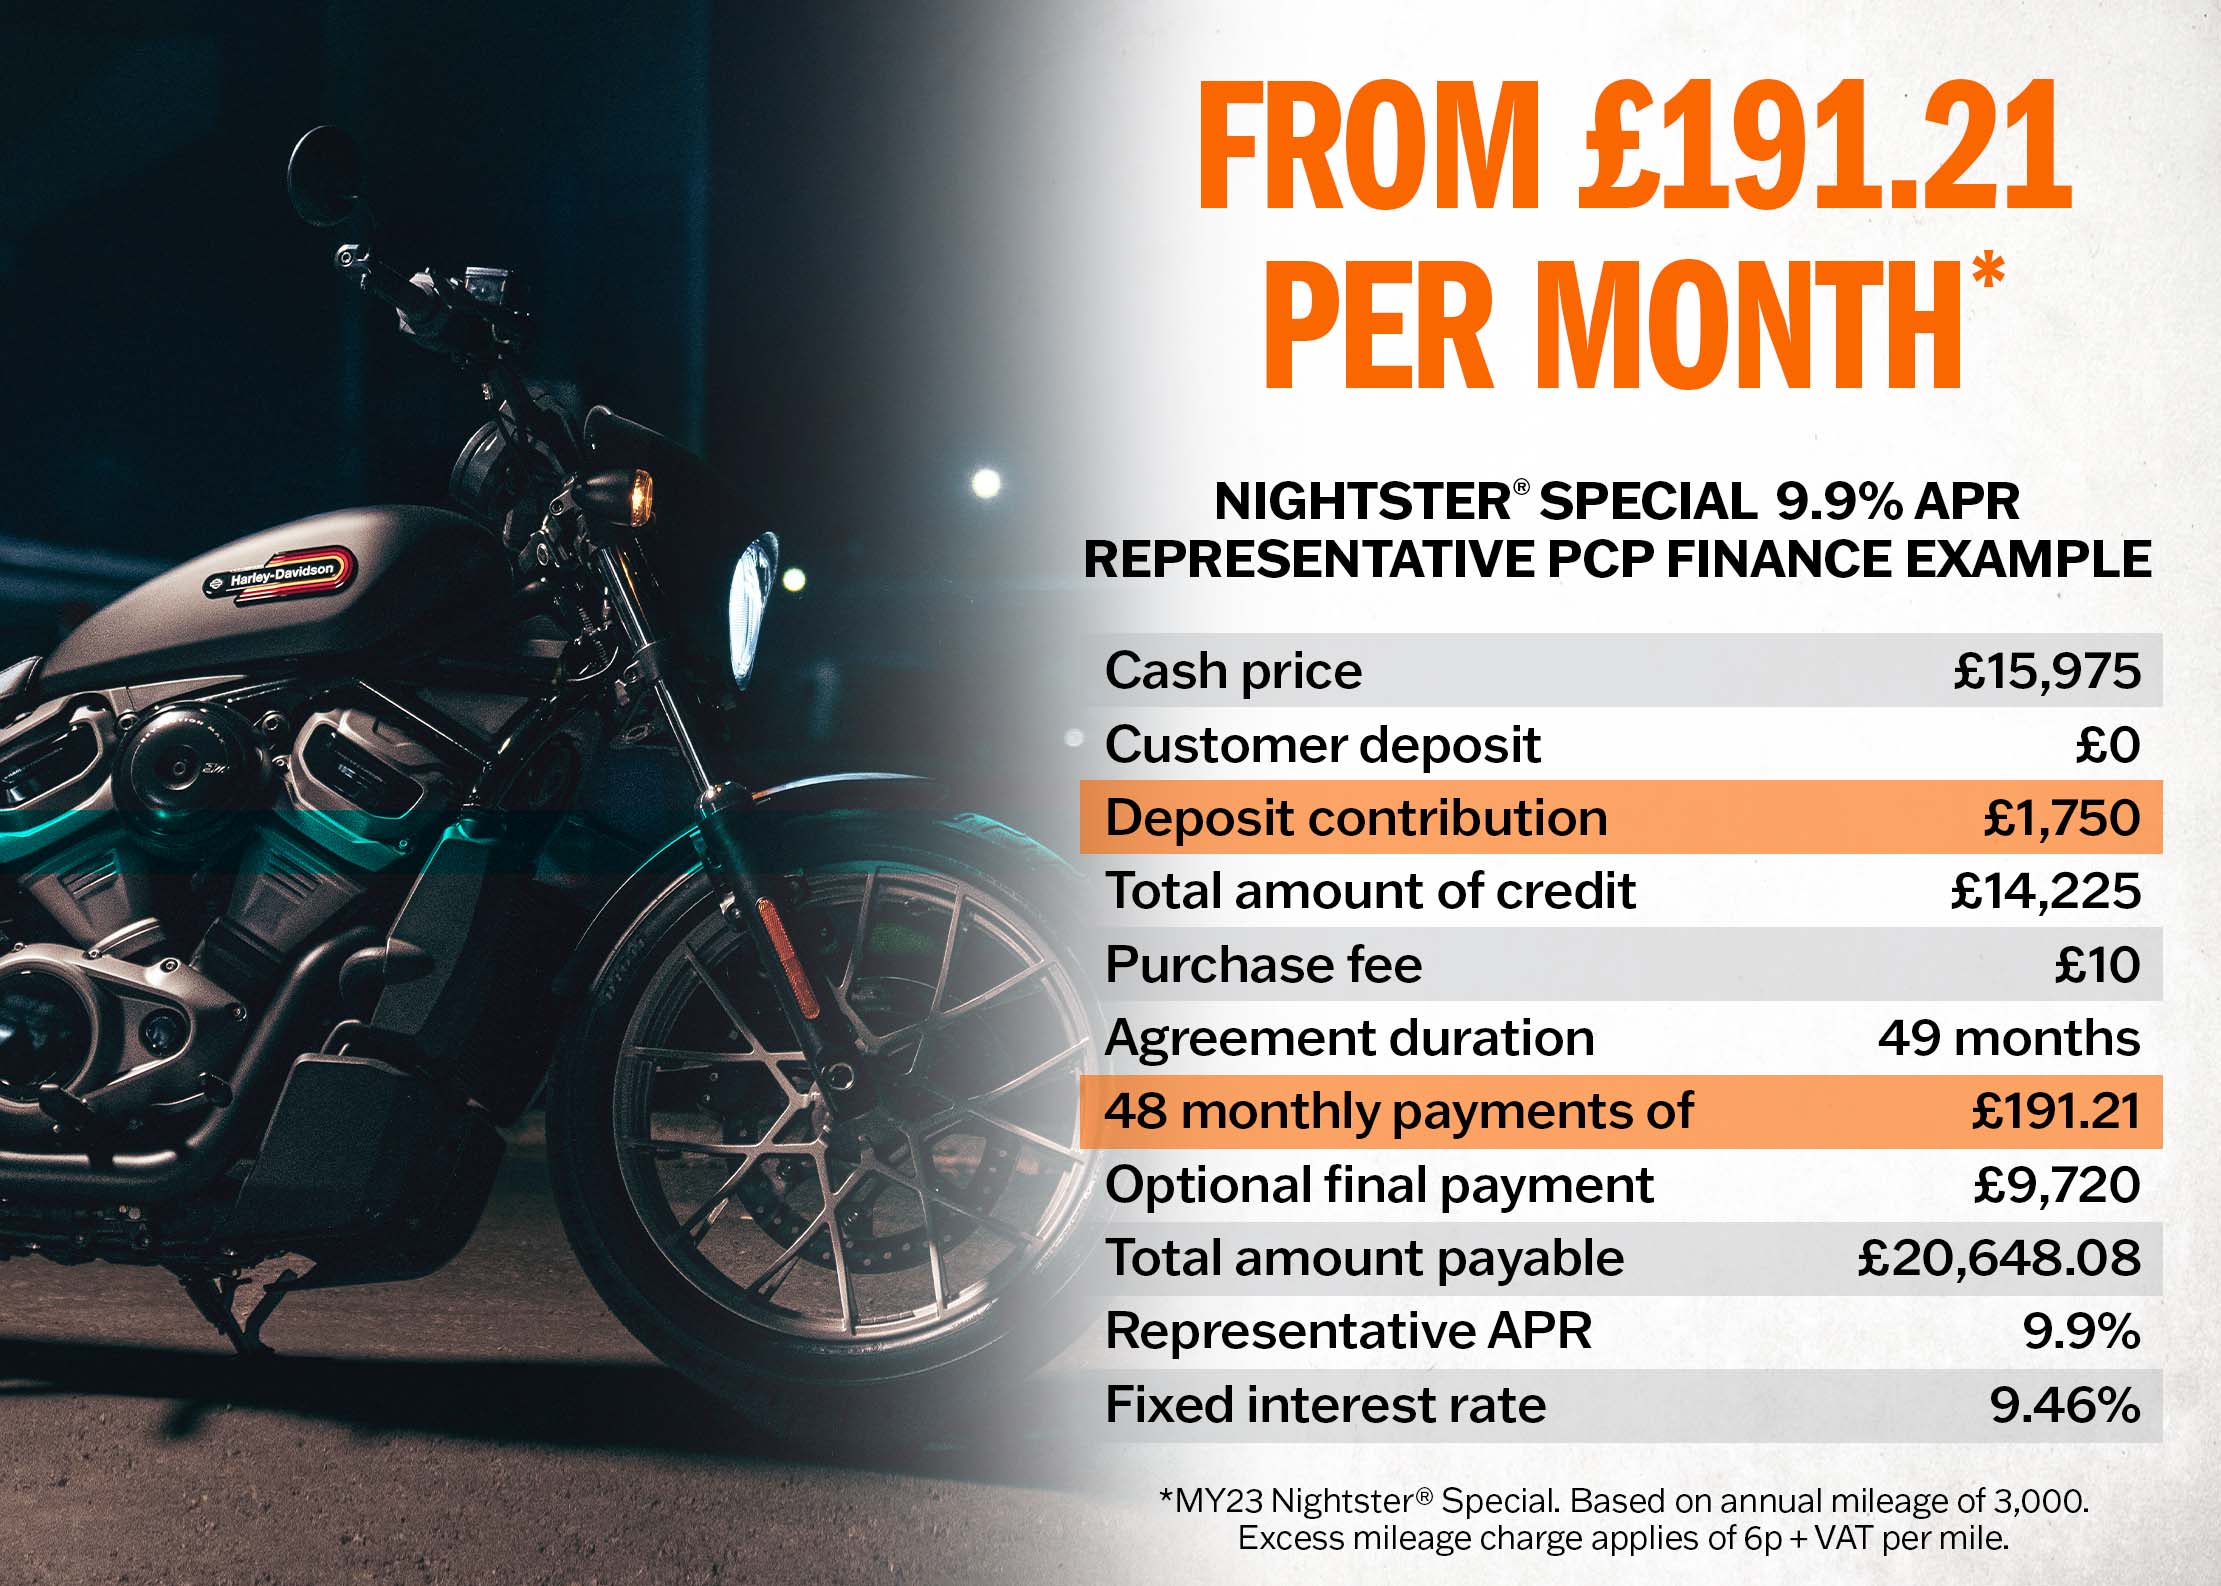 Nightster Special Finance Example